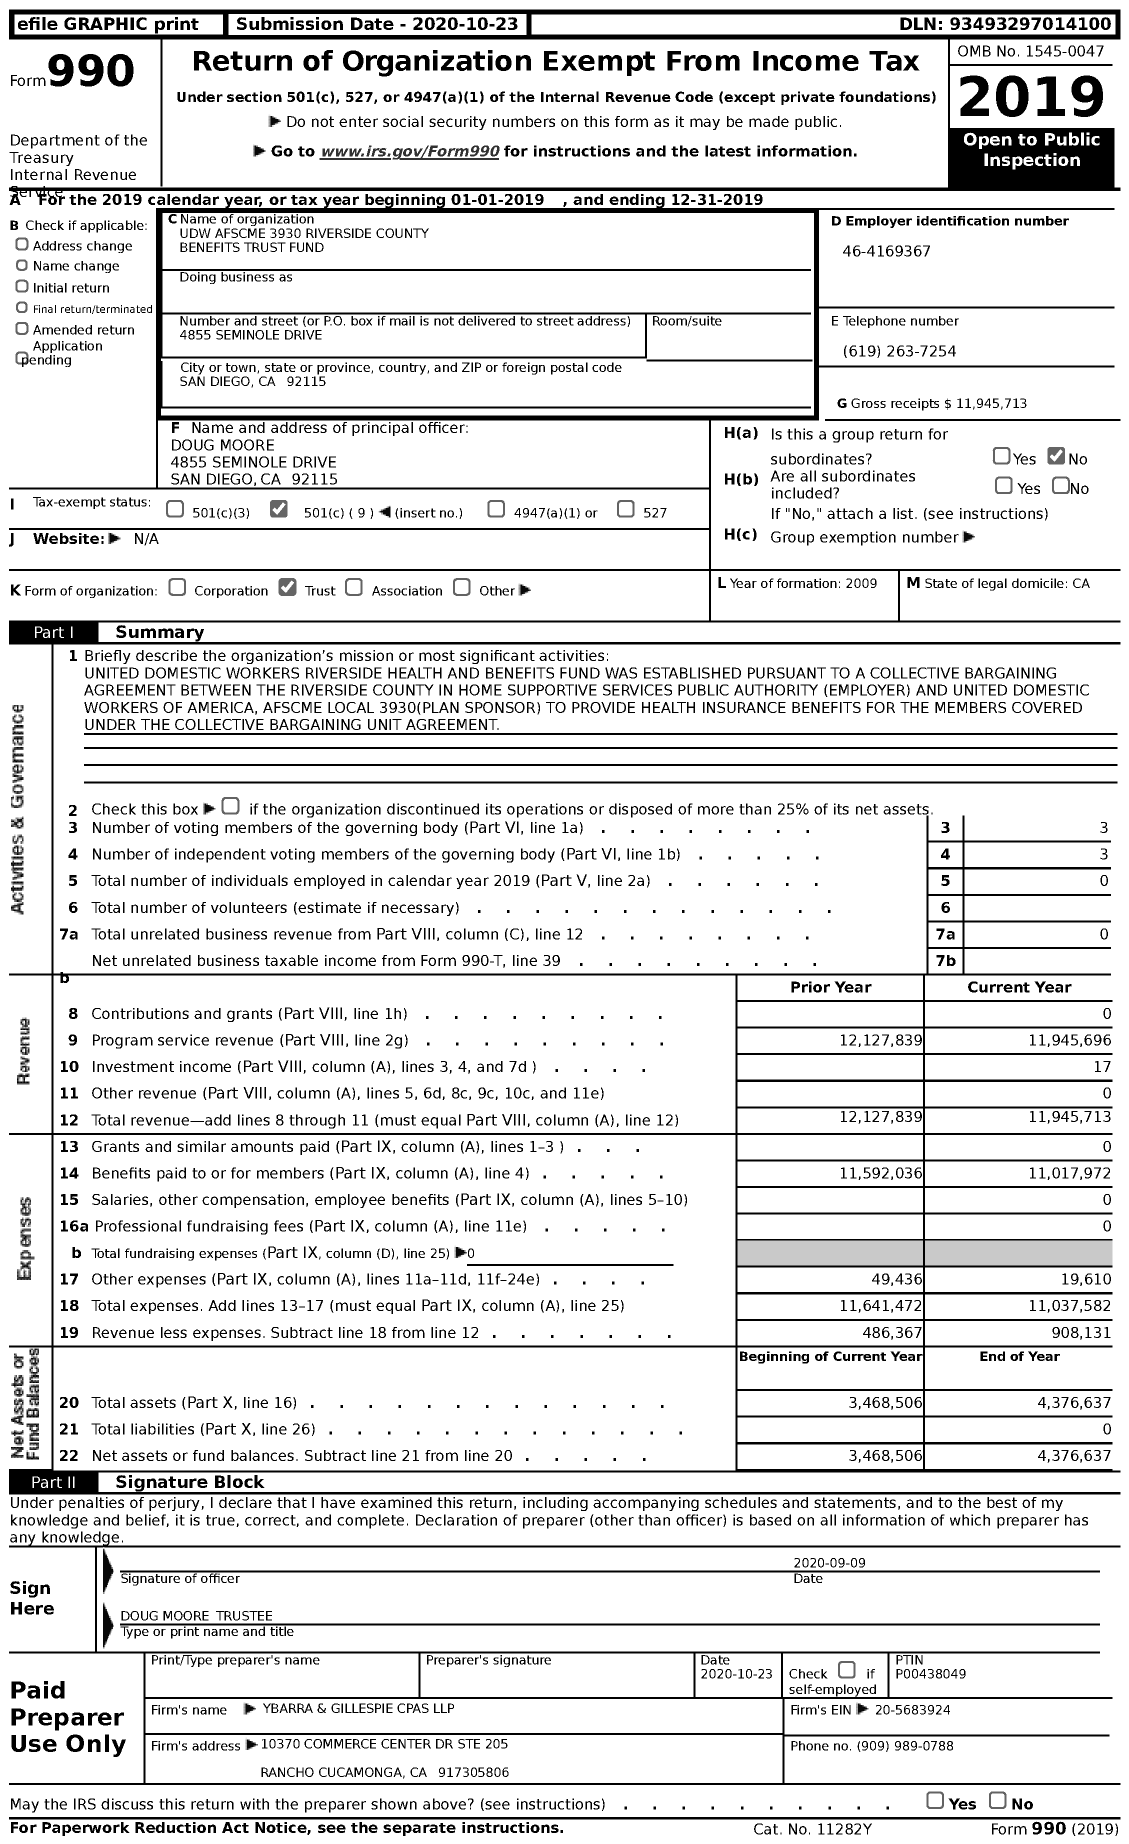 Image of first page of 2019 Form 990 for Udw AFSCME 3930 Riverside County Benefits Trust Fund